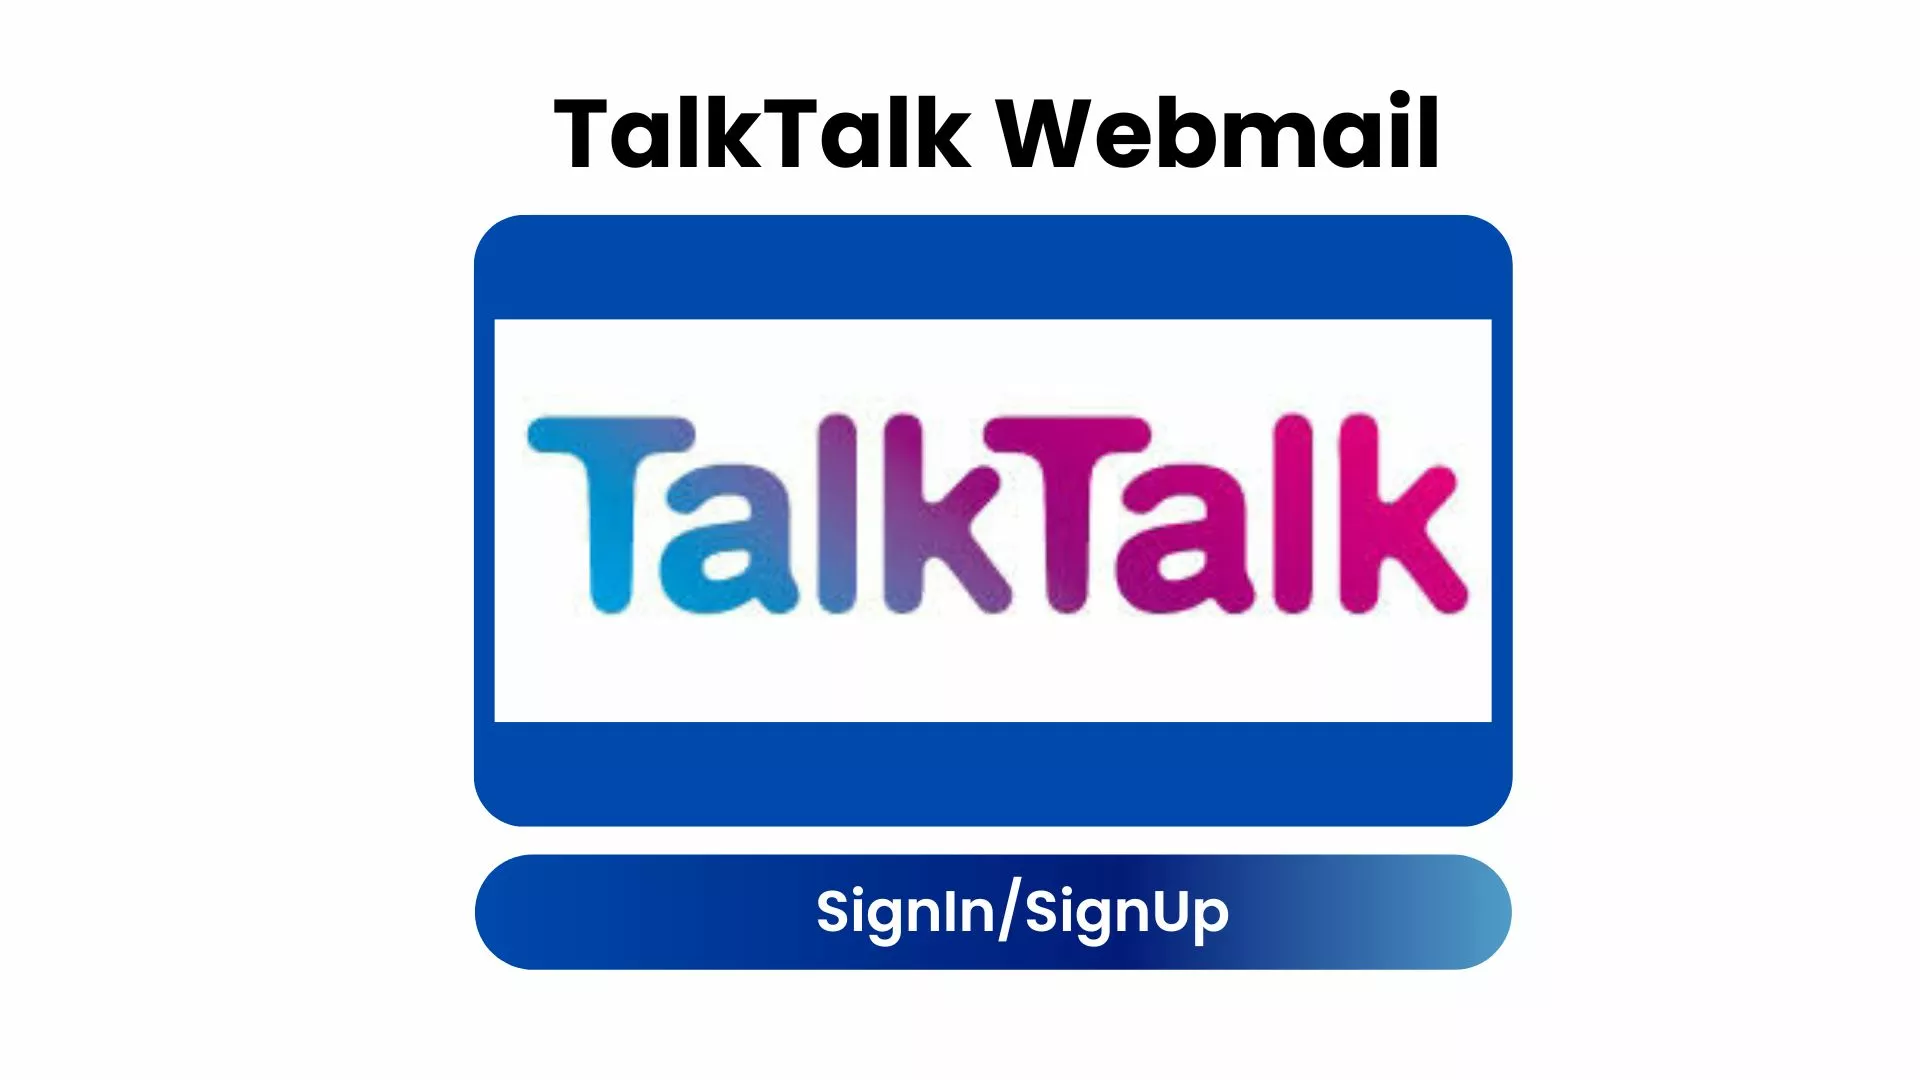 TalkTalk Webmail: A comprehensive guide to signing up and logging in